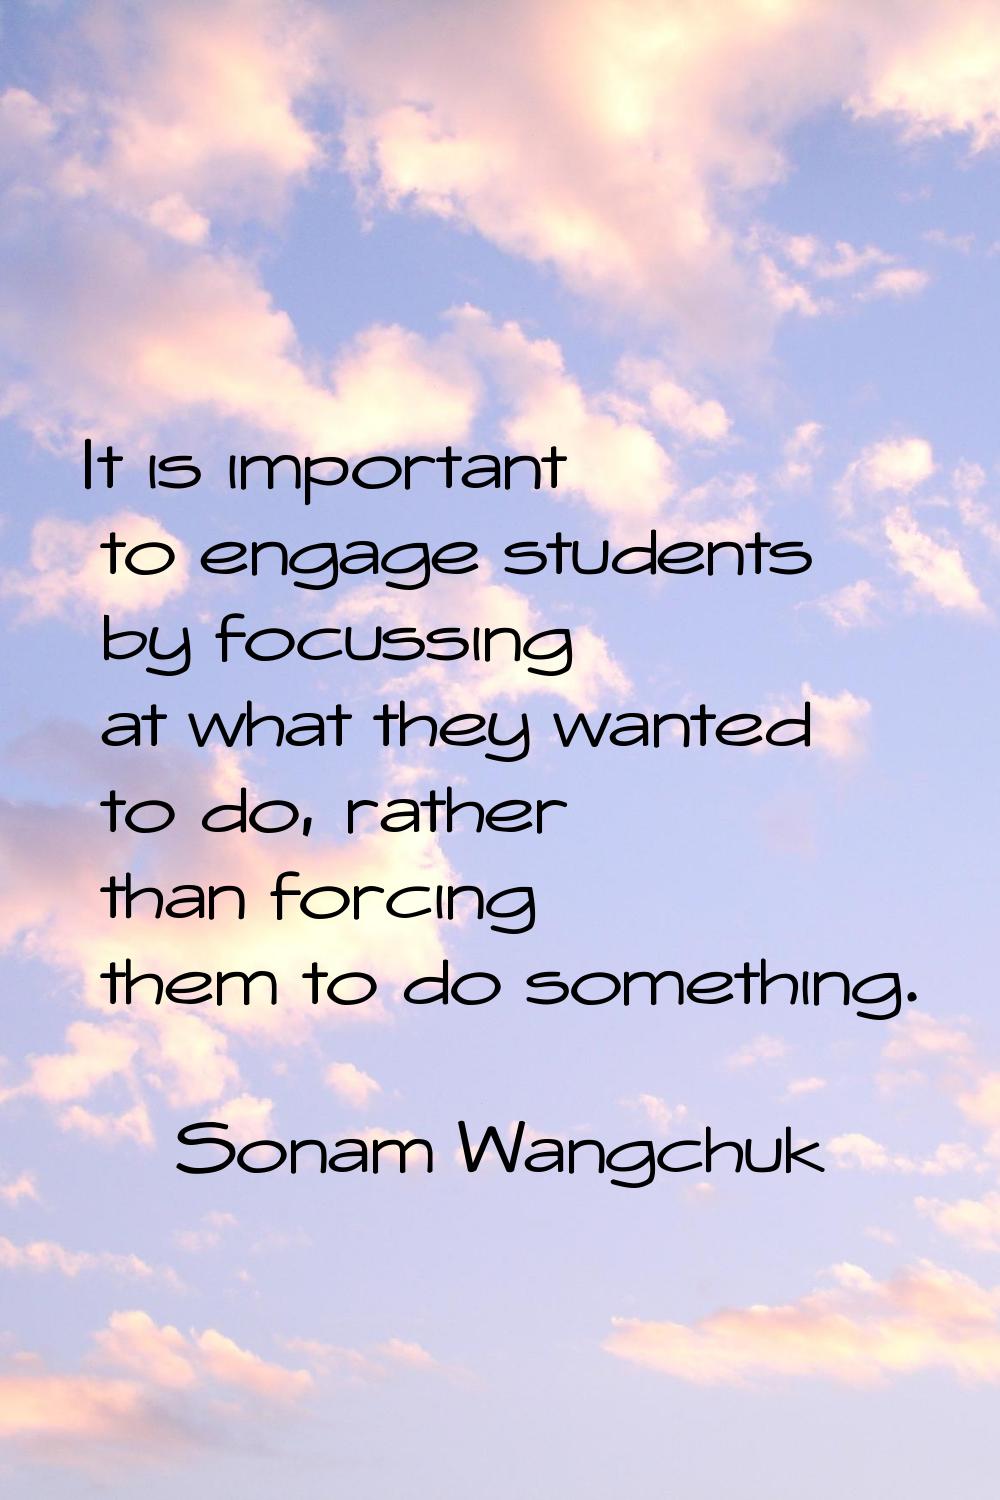 It is important to engage students by focussing at what they wanted to do, rather than forcing them